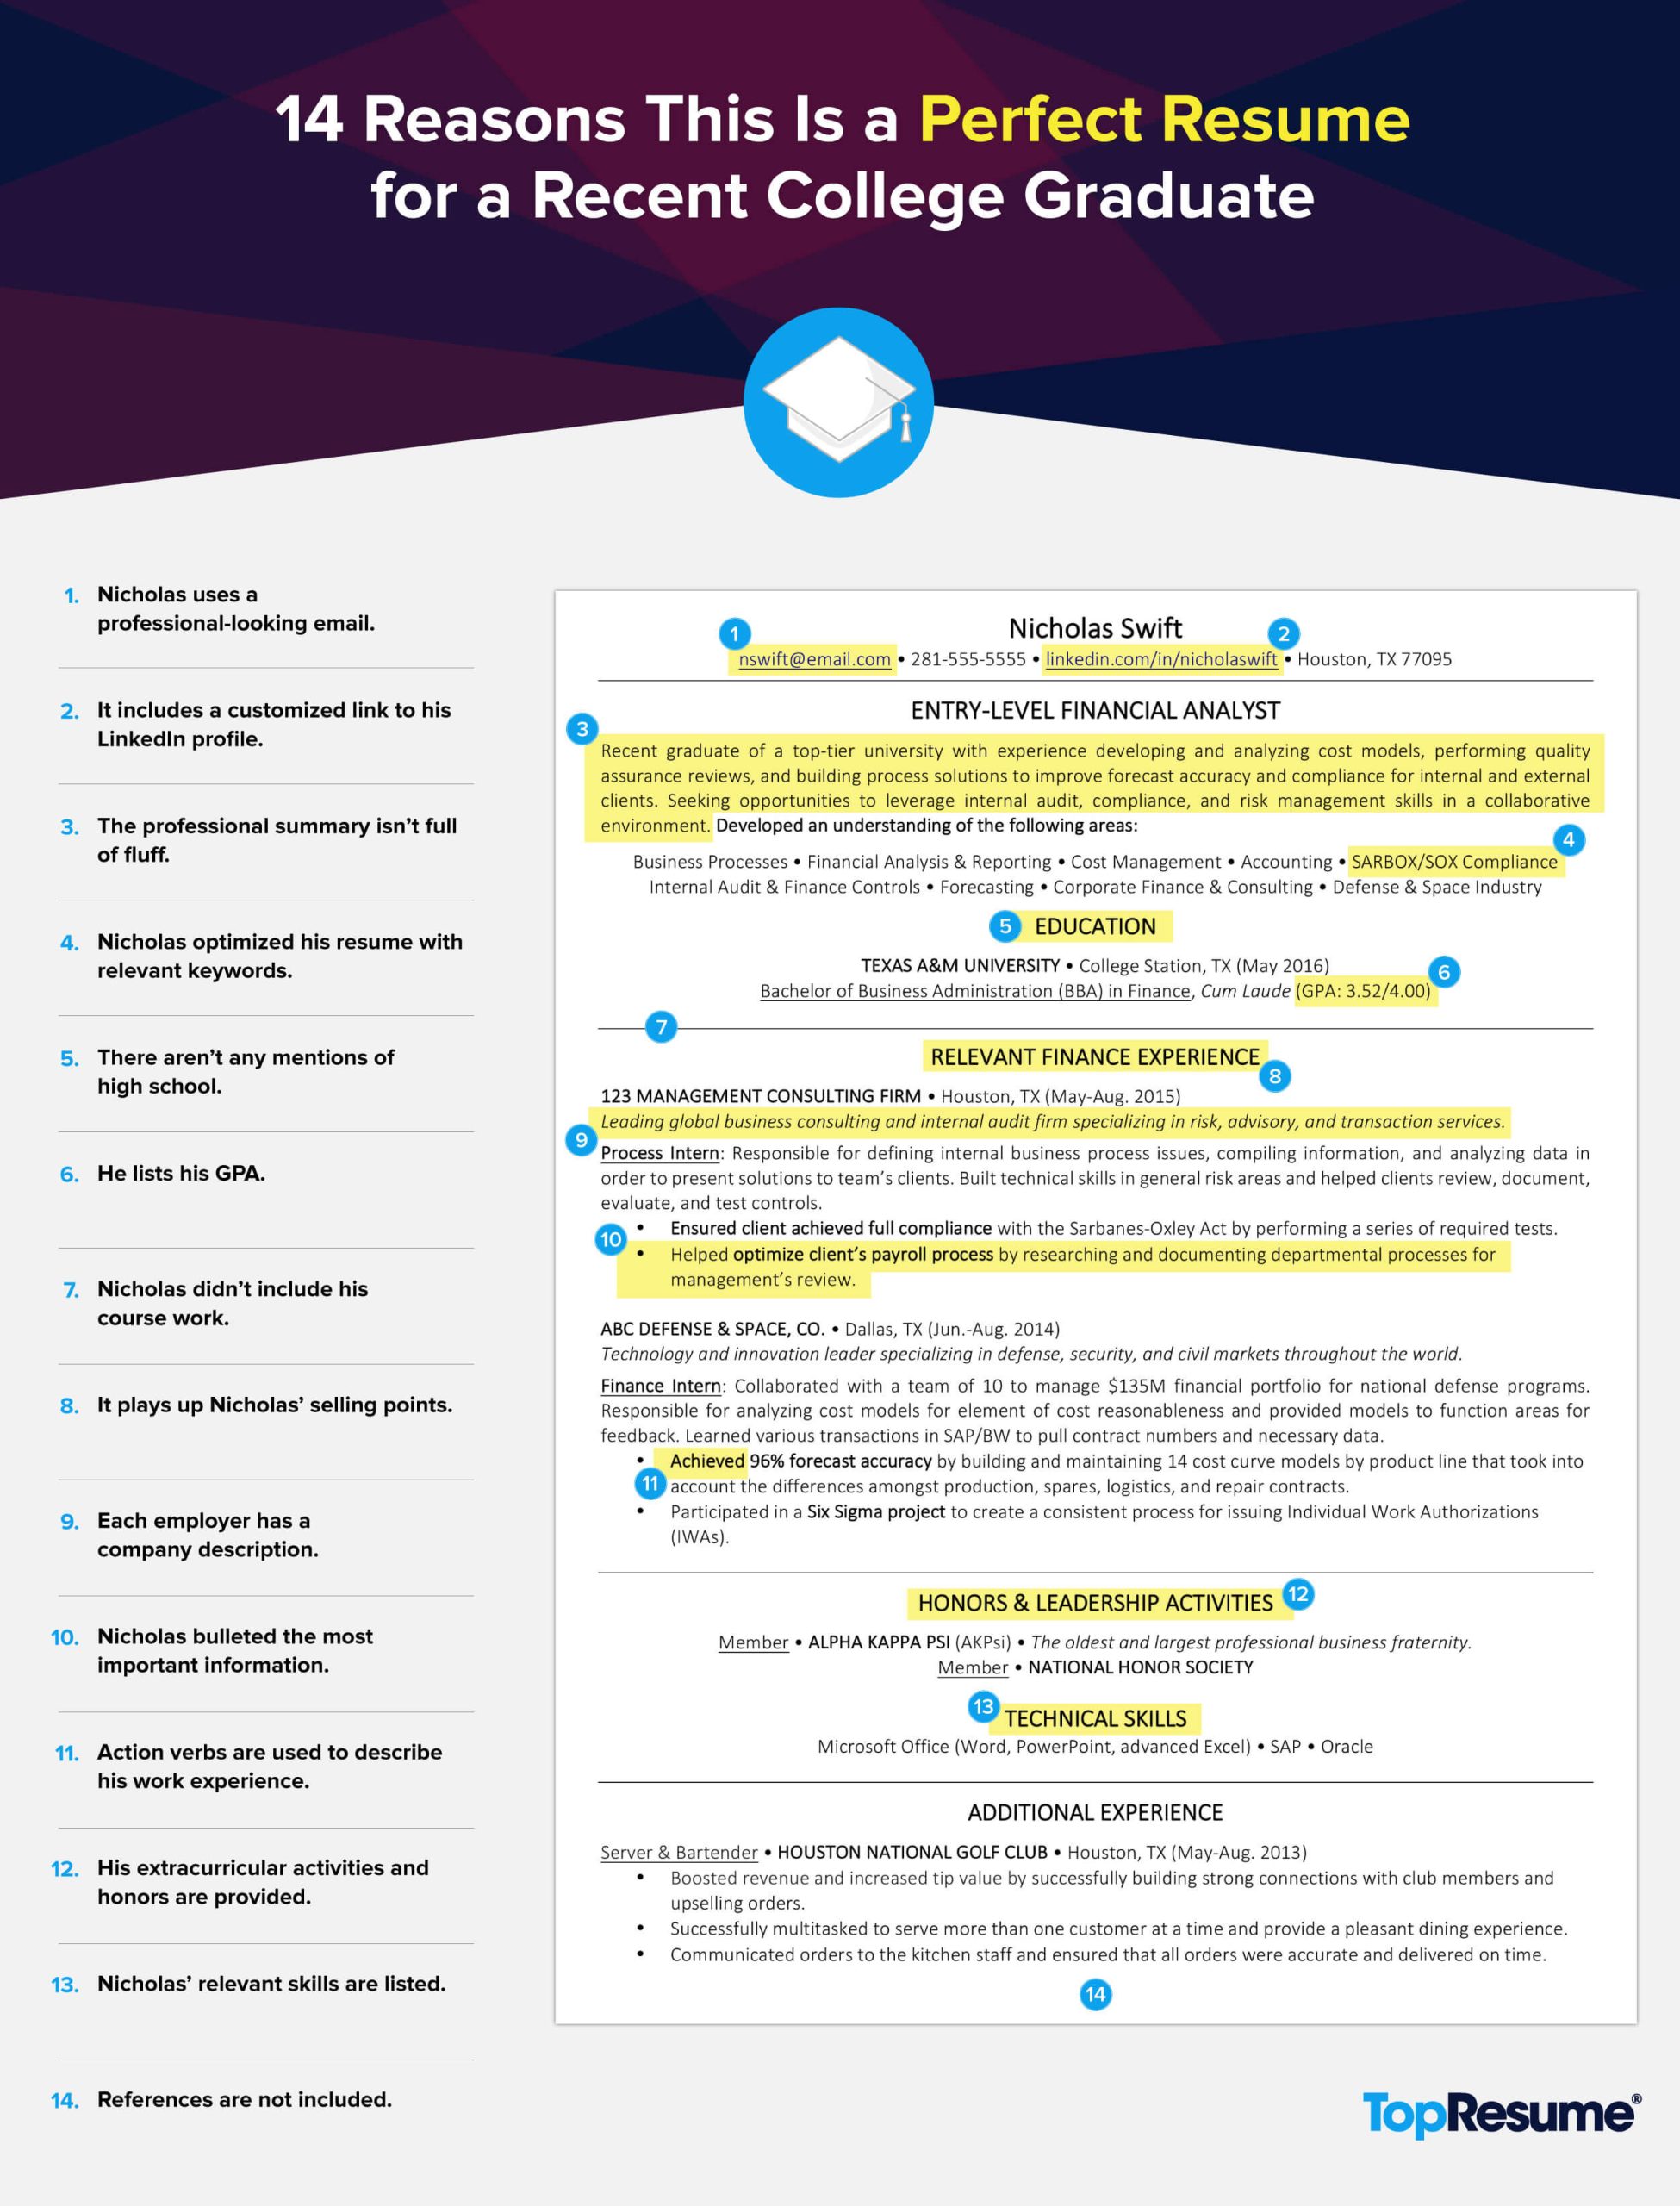 Sample Resume Objectives for College Graduates 14 Reasons This is A Perfect Recent College Graduate Resume …